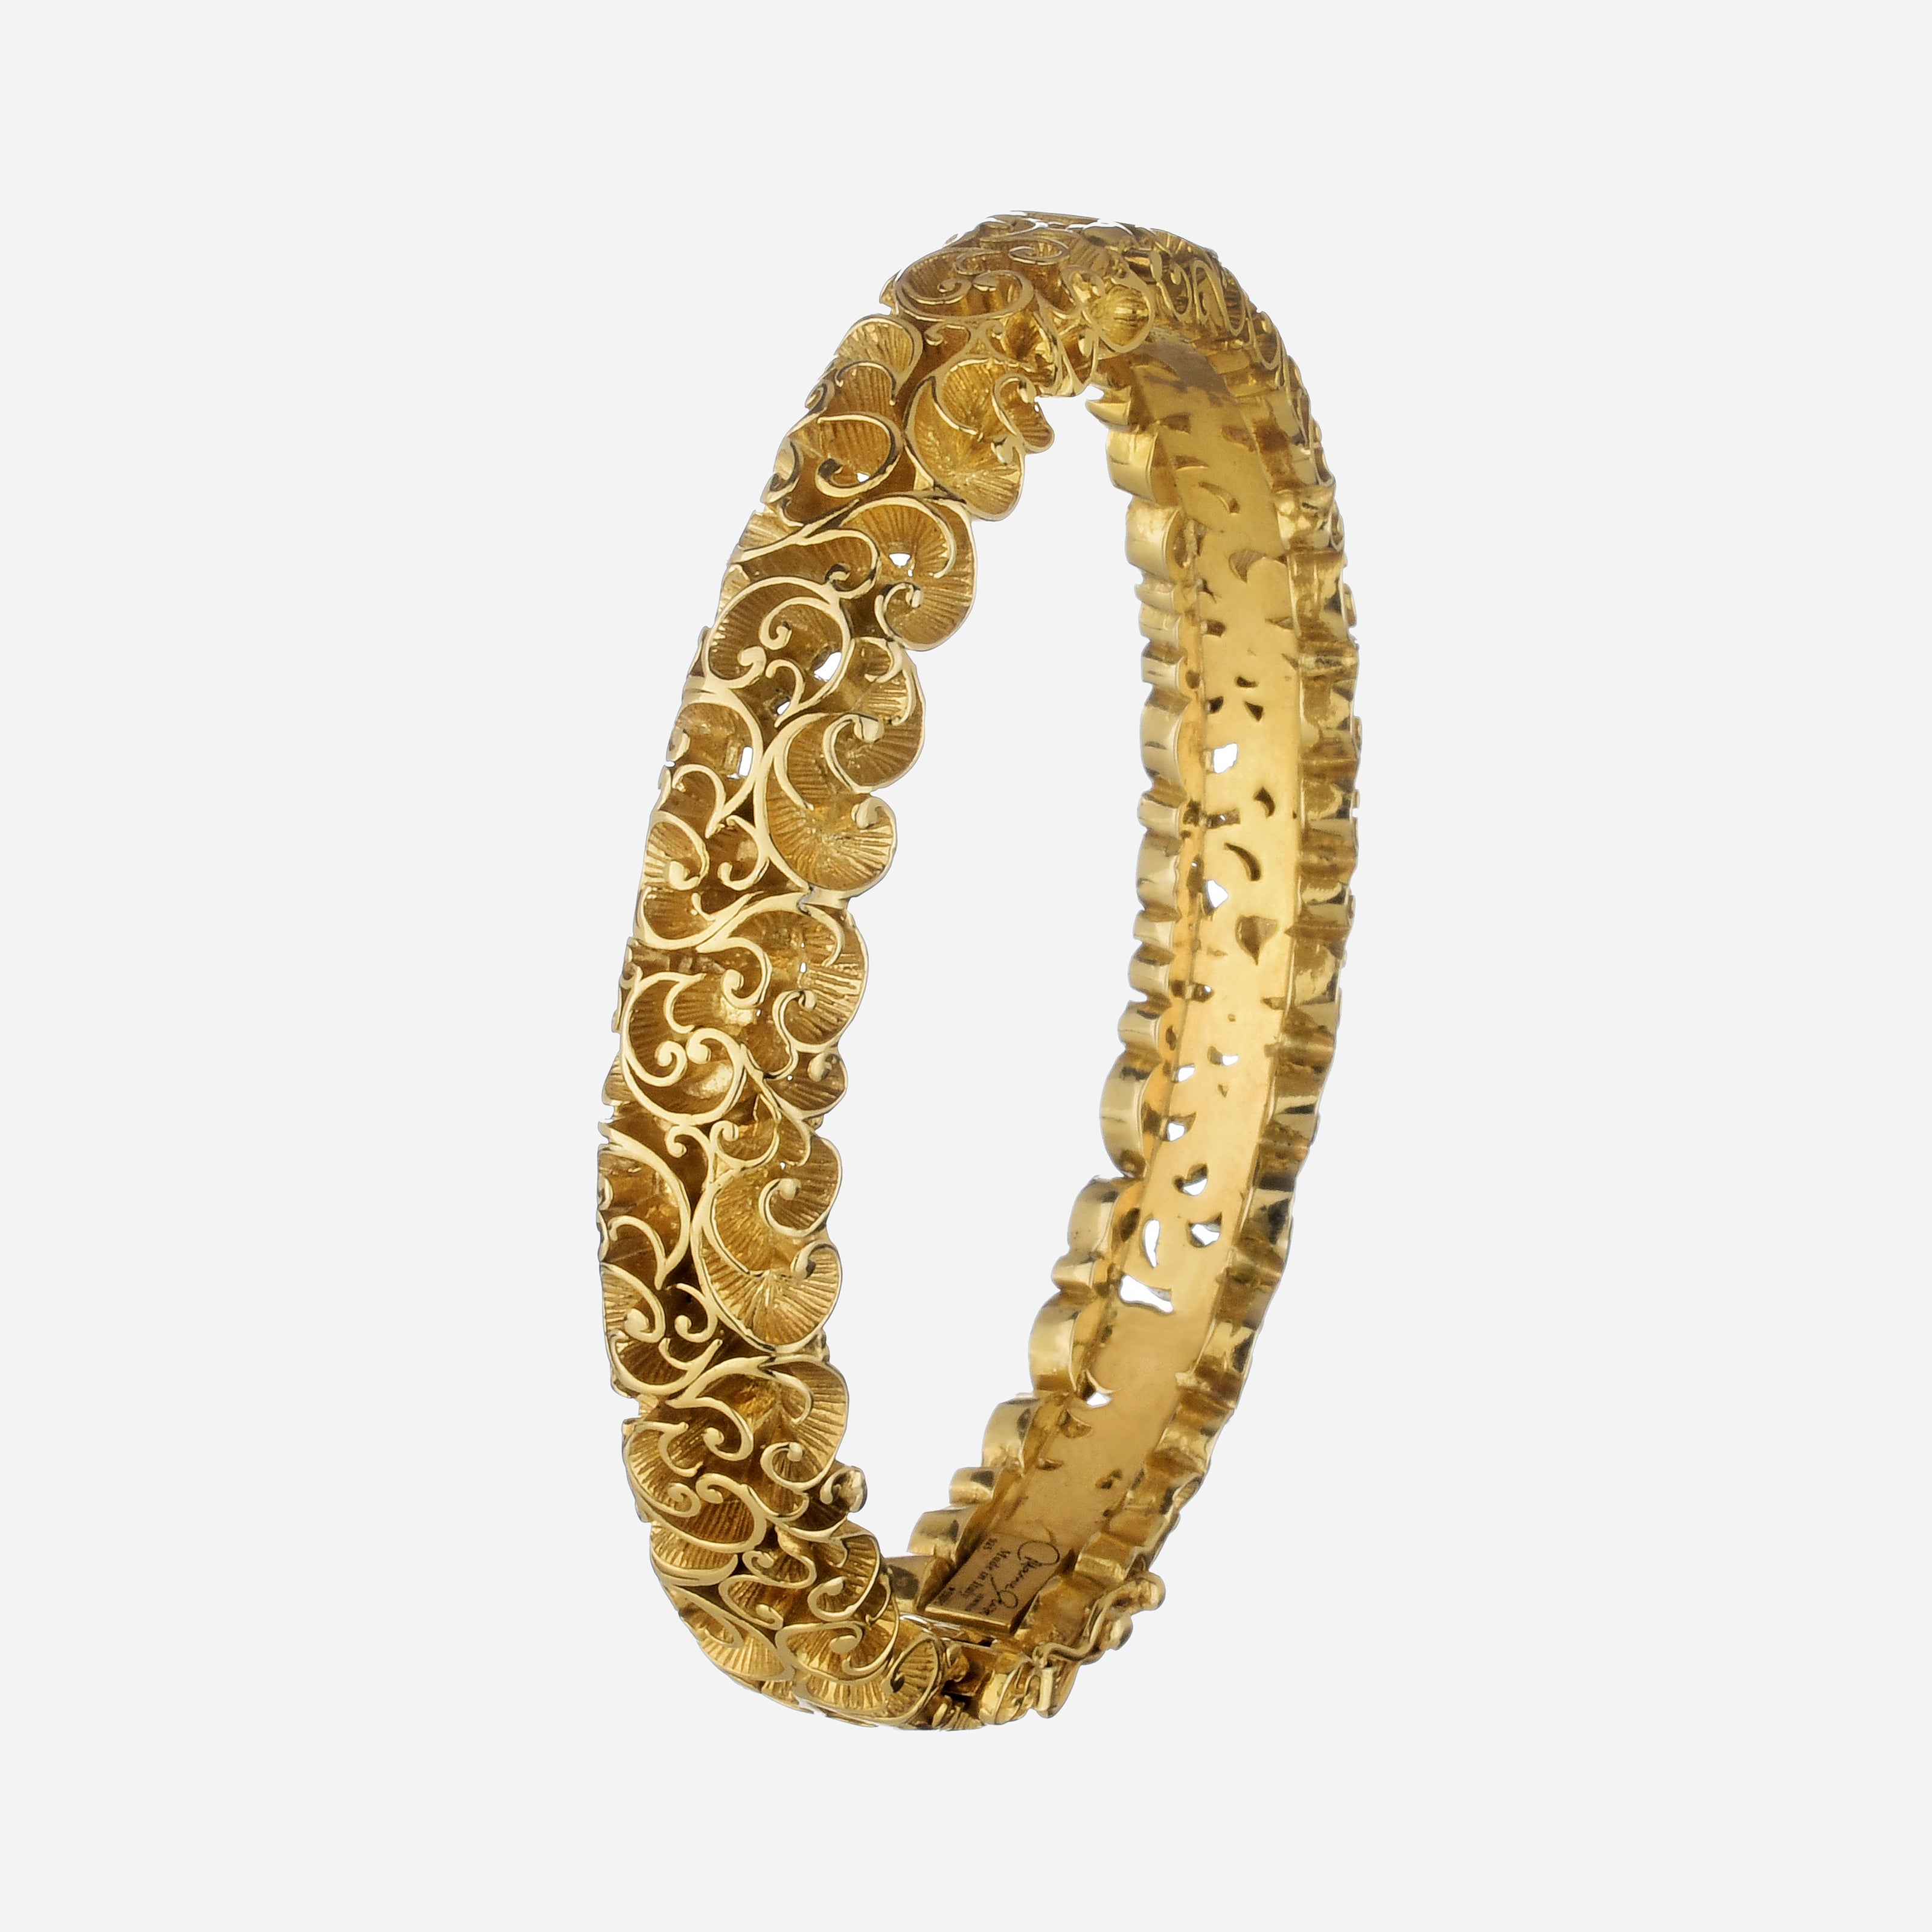 Opera bracelet with narrow cuff in yellow gold